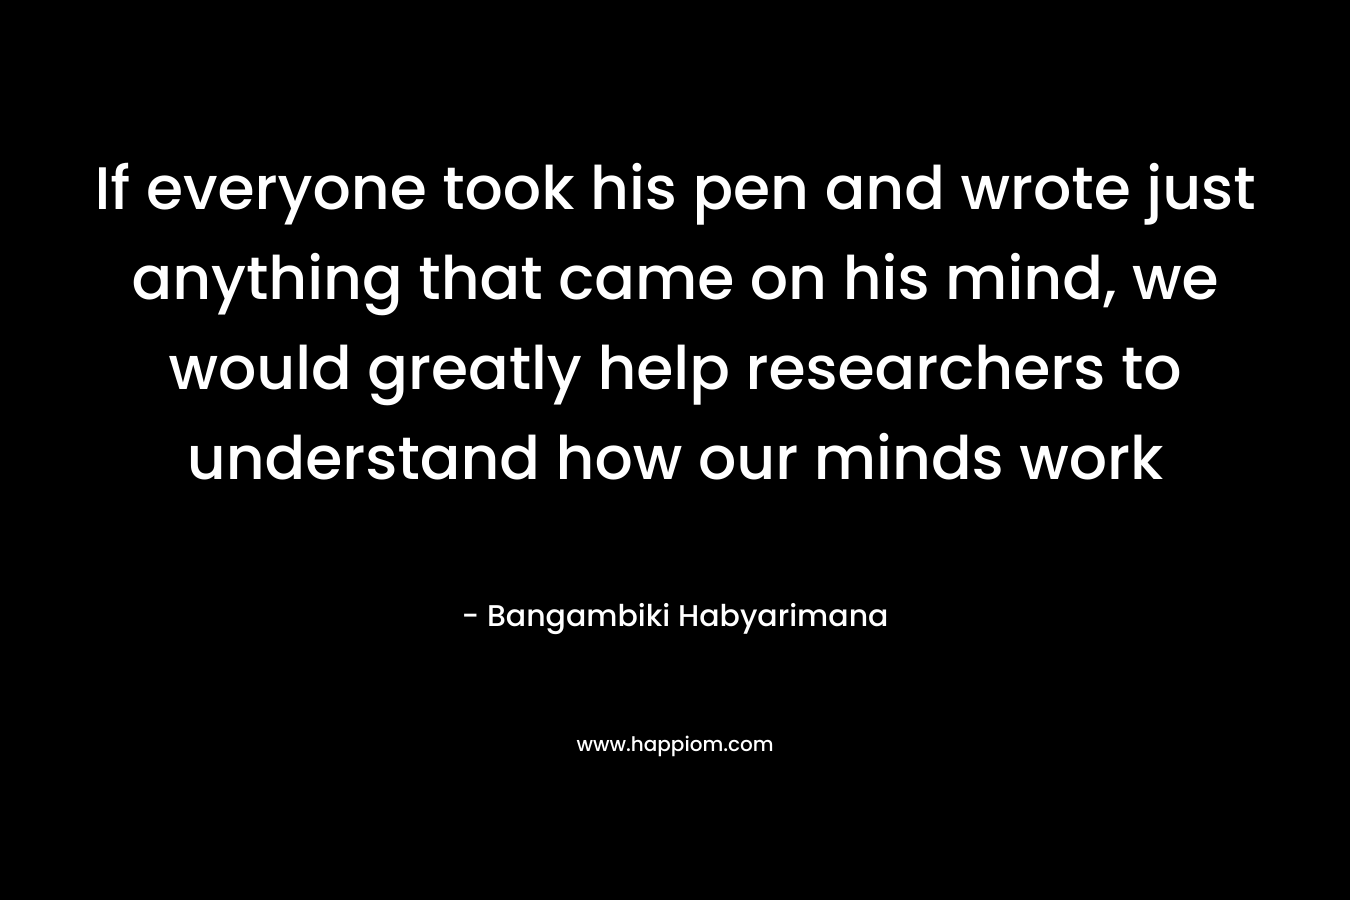 If everyone took his pen and wrote just anything that came on his mind, we would greatly help researchers to understand how our minds work – Bangambiki Habyarimana